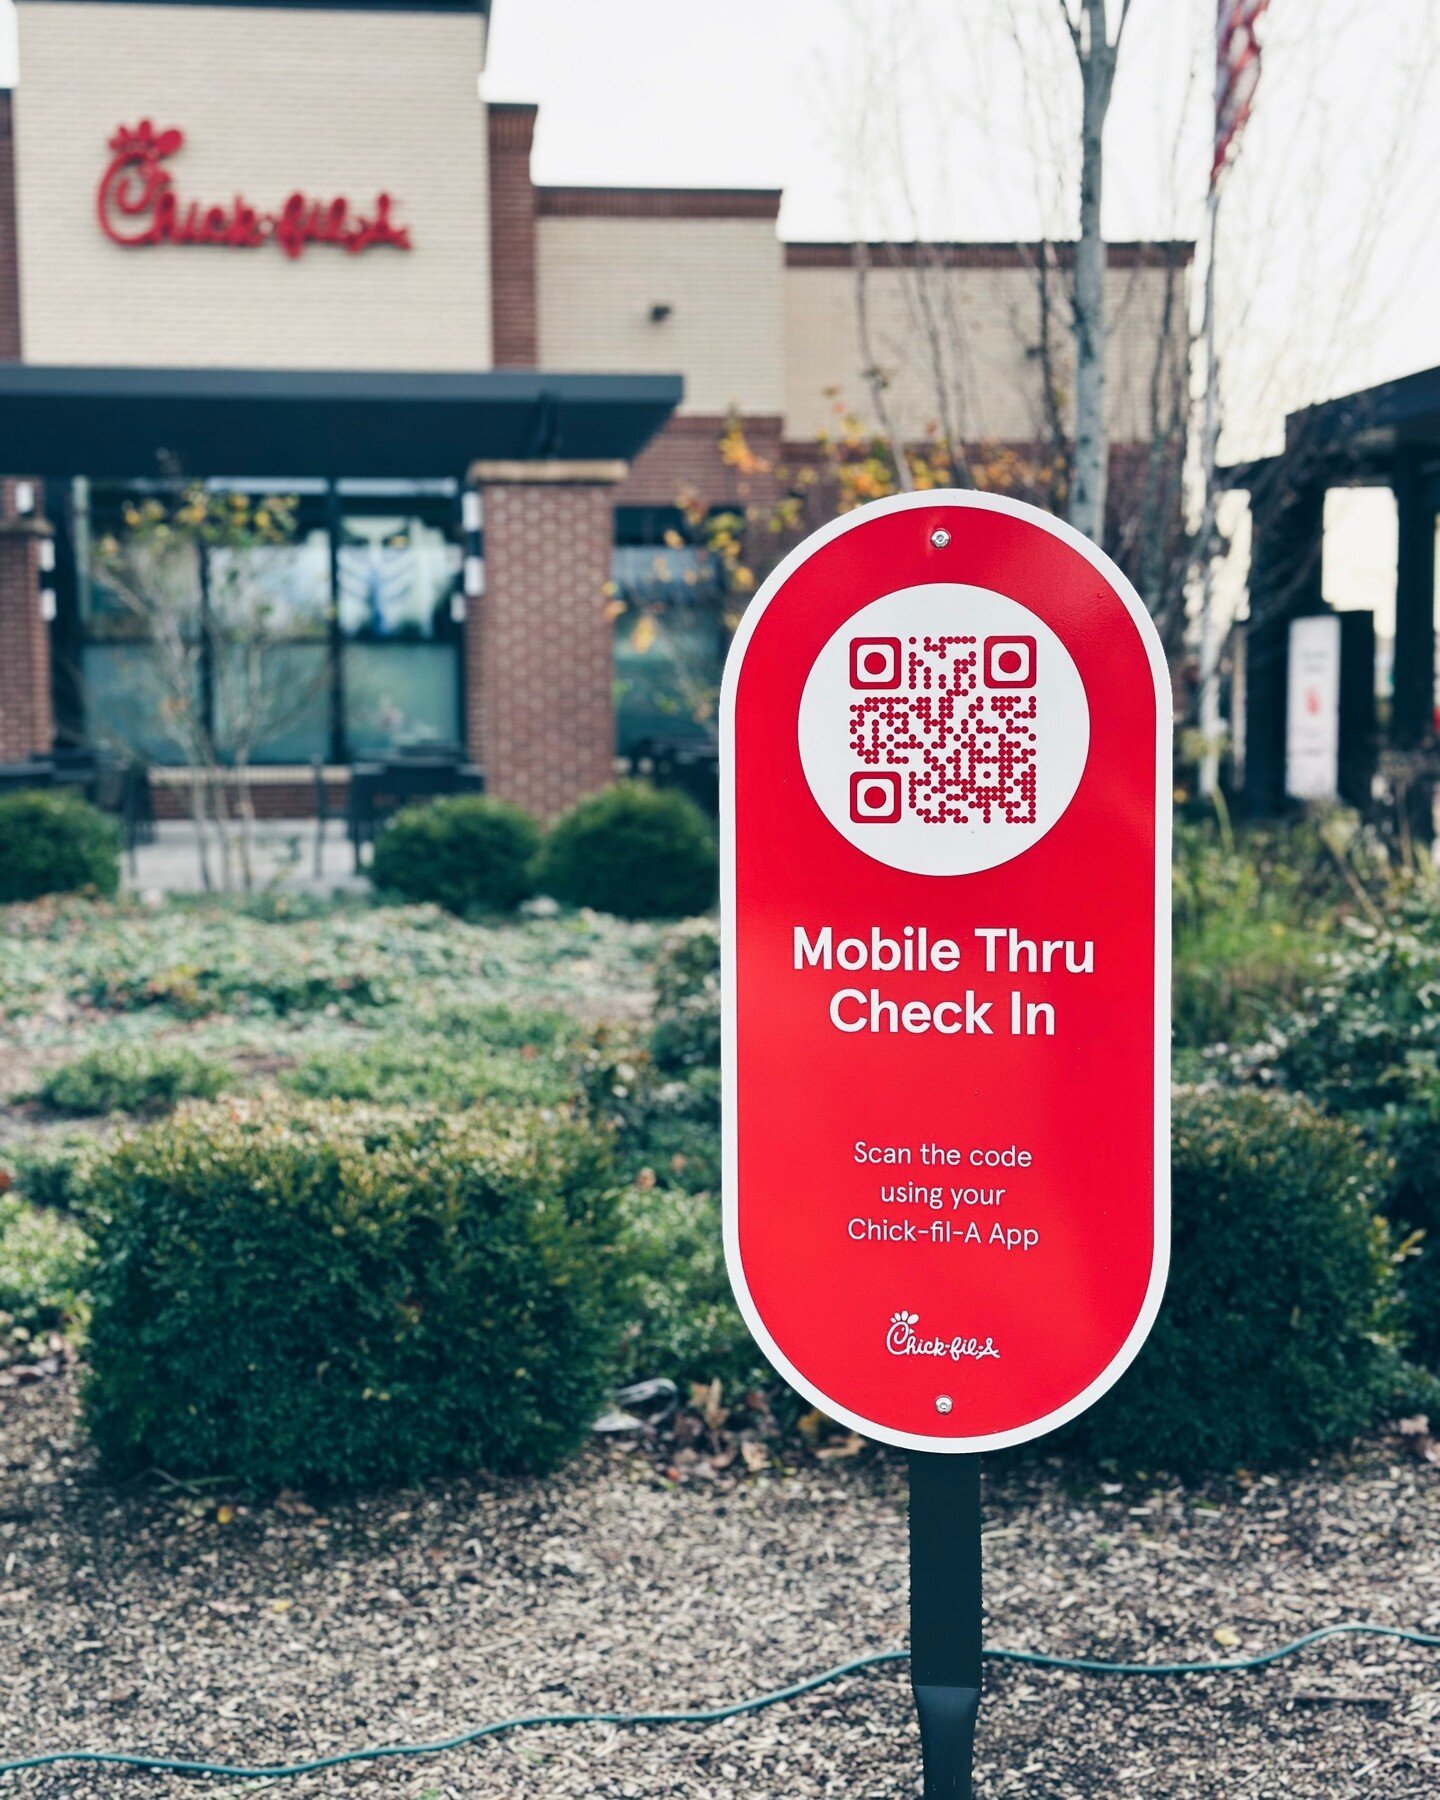 A drive thru lane just for mobile orders 😱

During the month of January when you place a Mobile Drive Thru order on the app you will receive 50 bonus points!

📝Here's how: 
1. Simply place an order ahead on the Chick-fil-A App 
2. Skip the line and